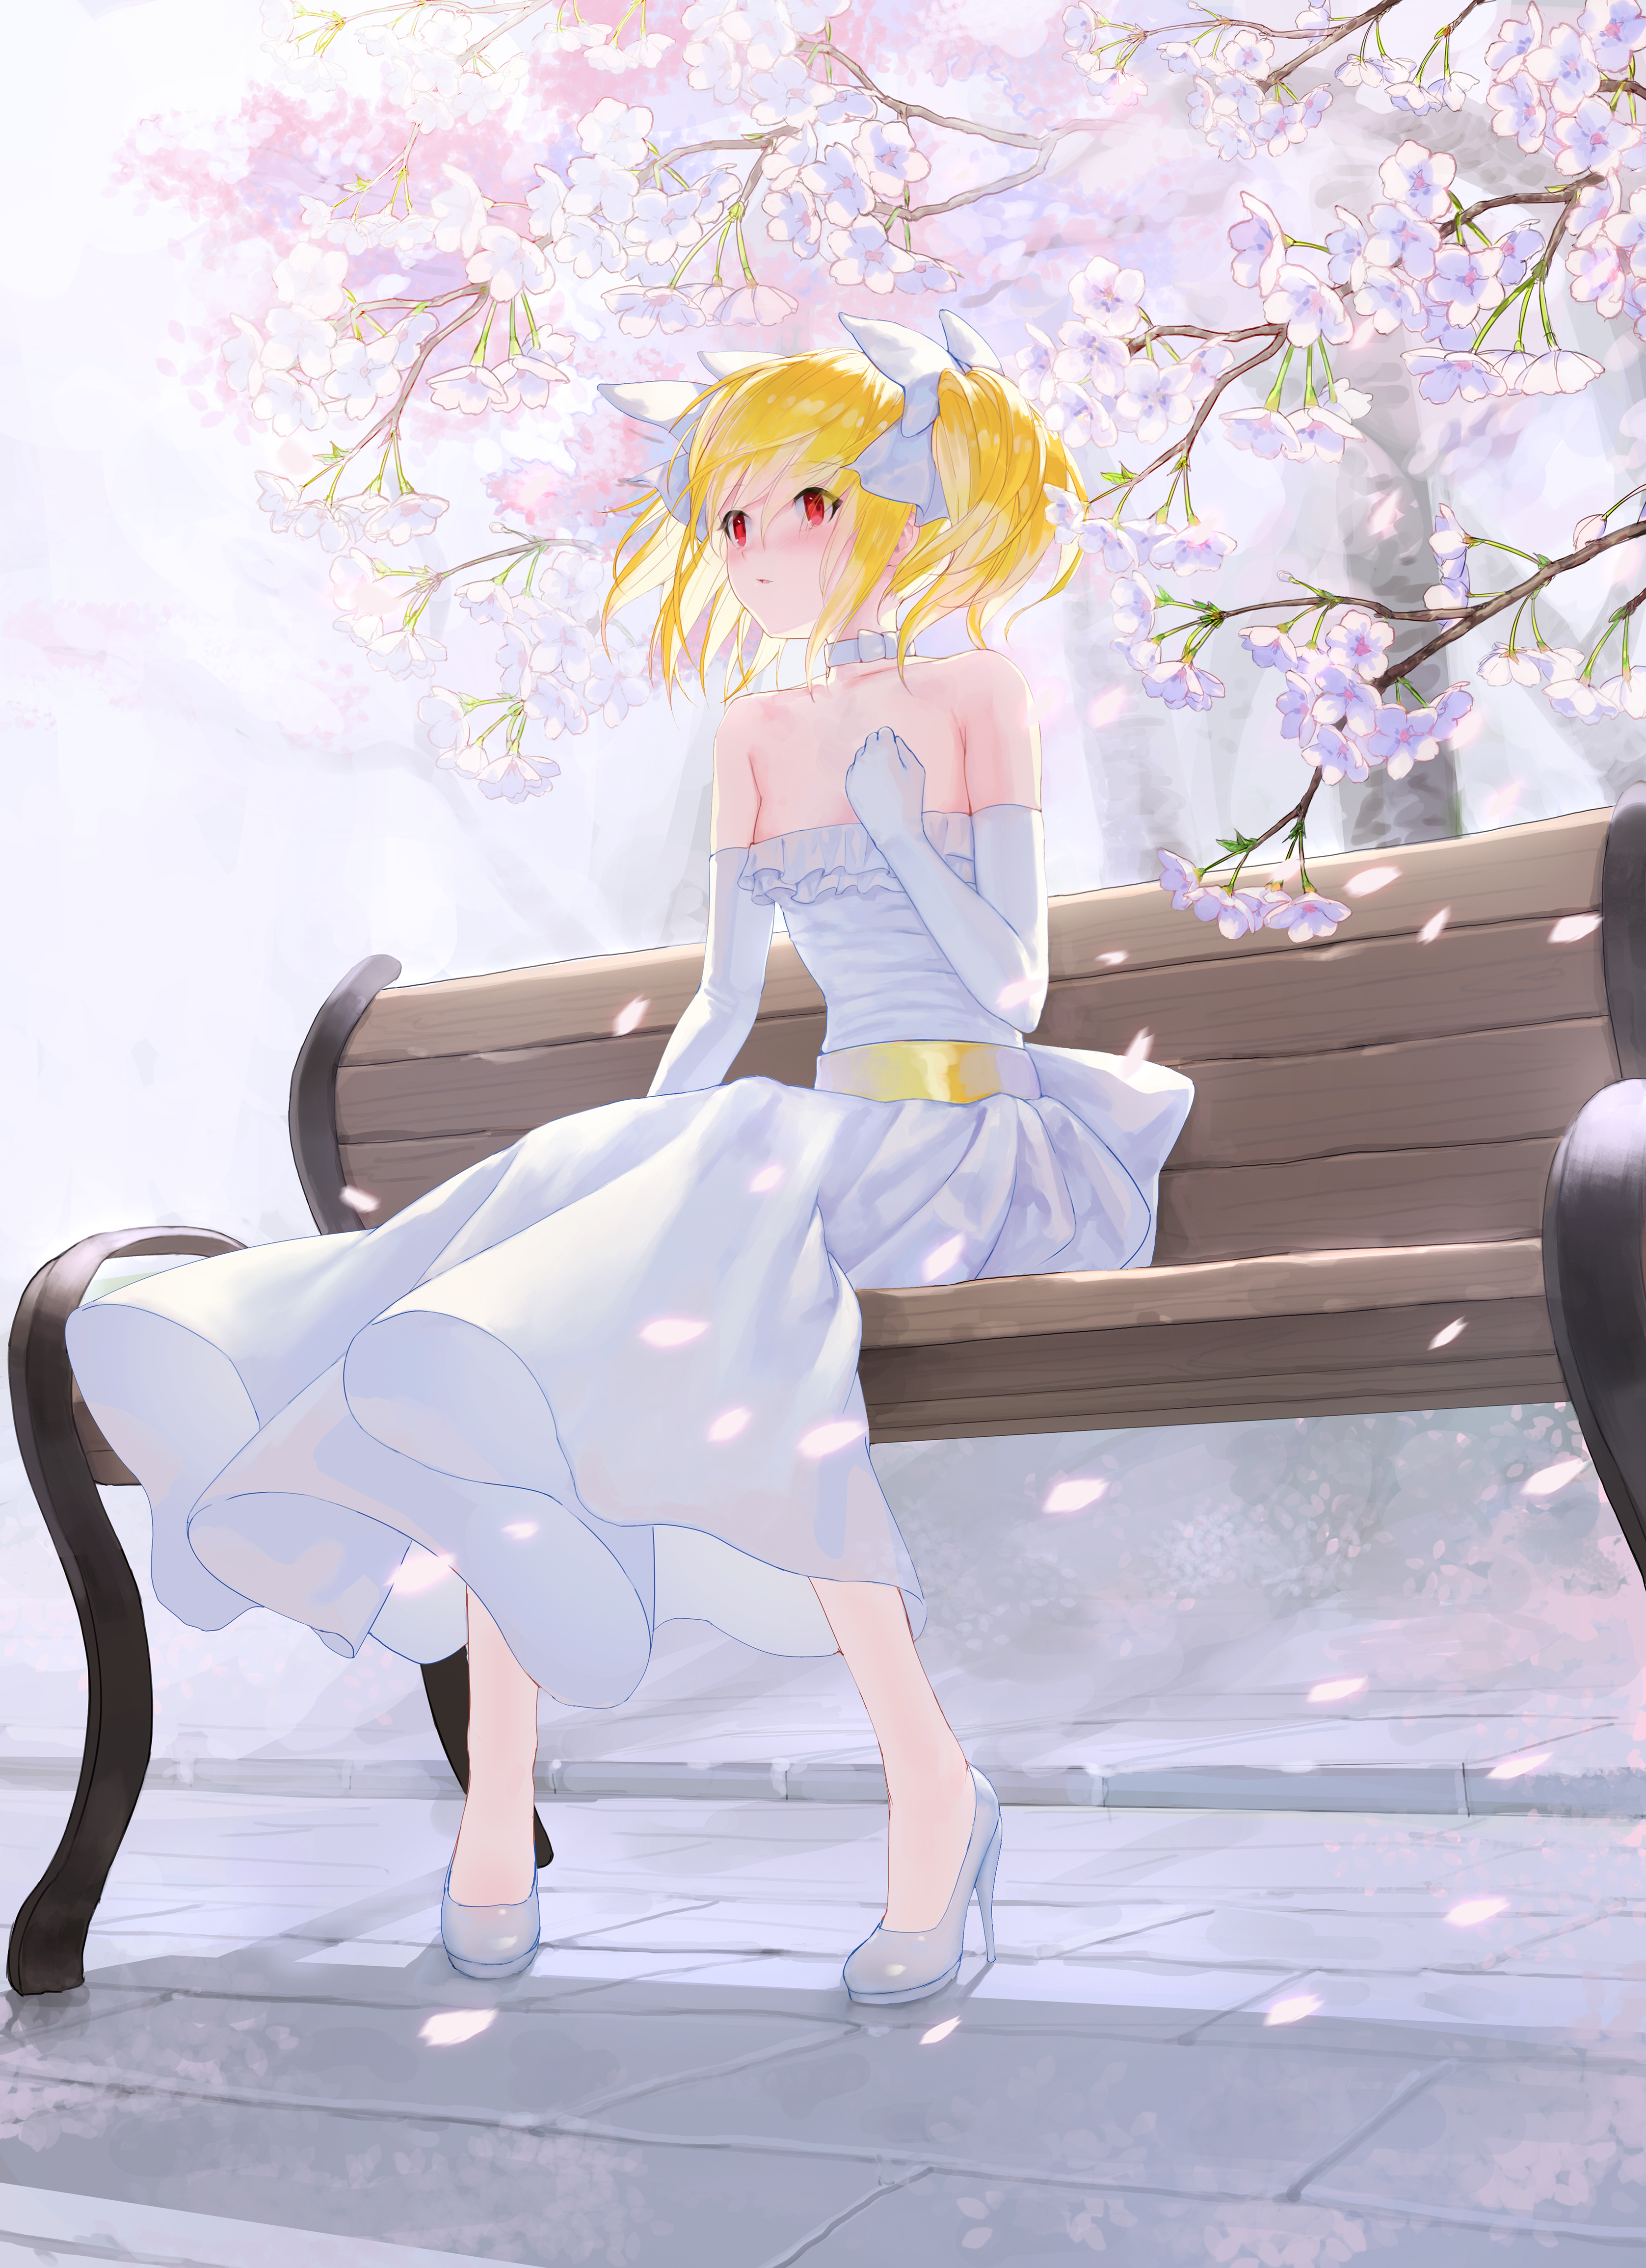 Anime 3354x4622 Dungeon and Fighter dress white dress cherry blossom anime